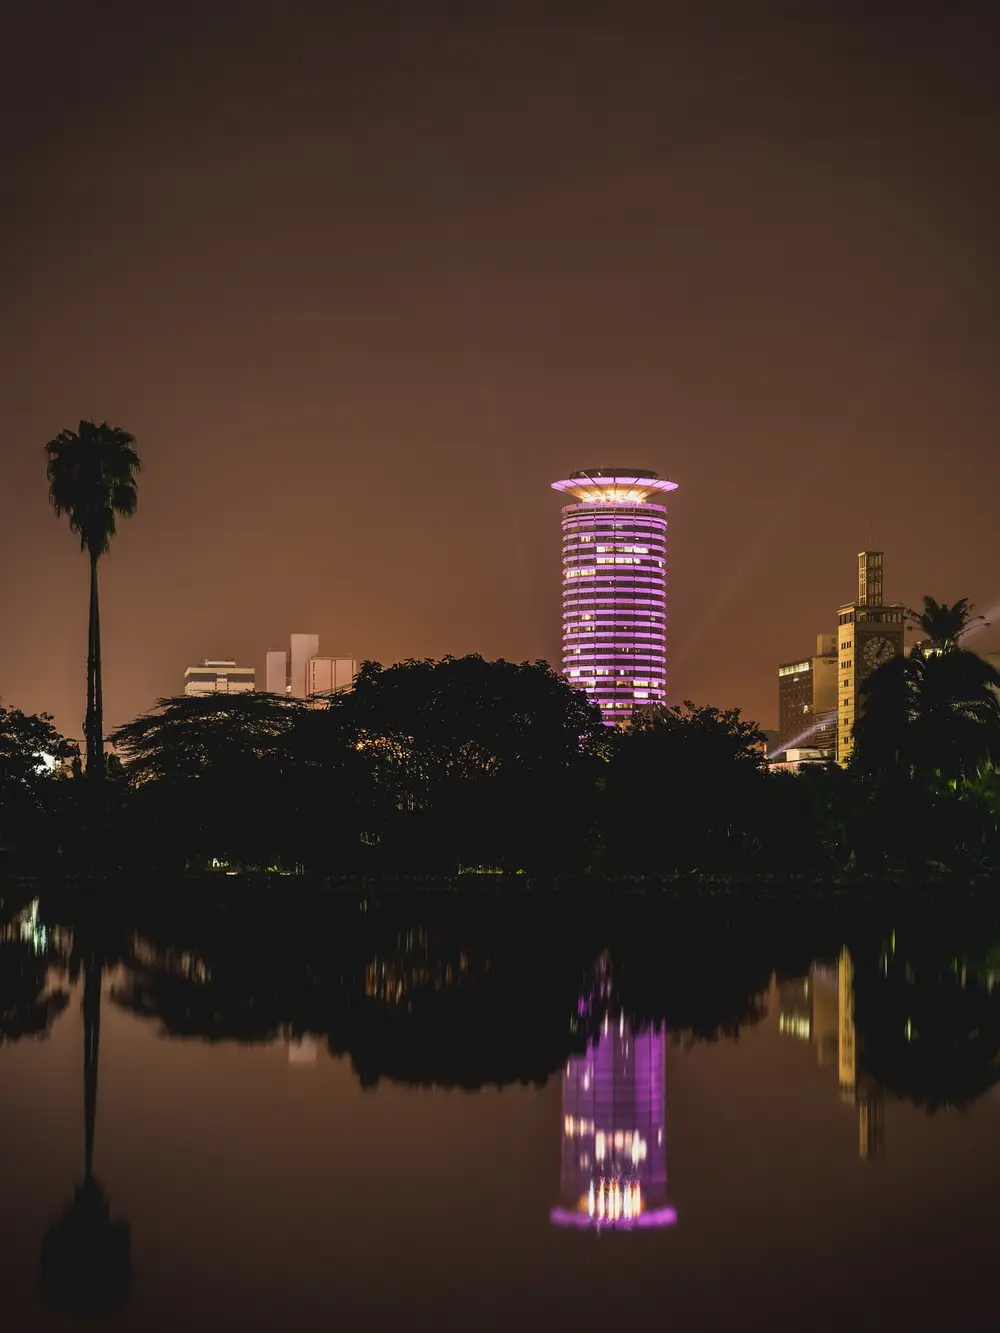 Nairobi is Kenya’s capital city. In addition to its urban core, the city has Nairobi National Park, a large game reserve known for breeding endangered black rhinos and home to giraffes, zebras, and lions. Next to it is a well-regarded elephant orphanage